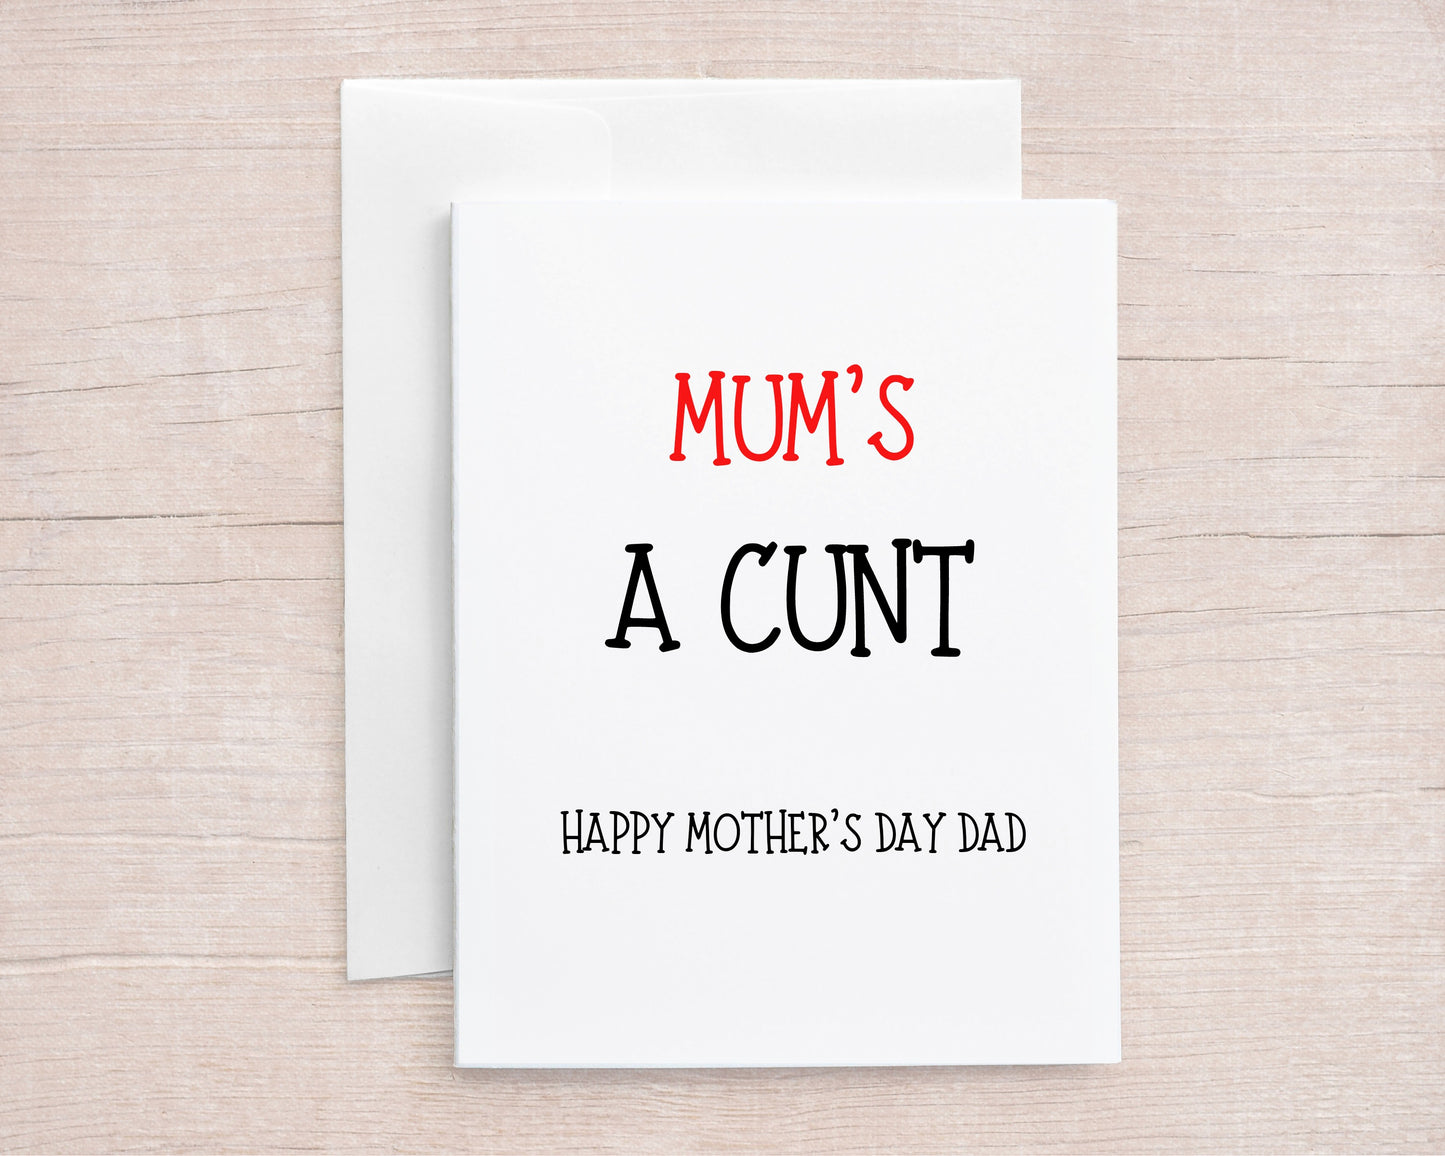 Mothers Day Card | Mum's A Cunt, Happy Mother's Day Dad | Funny Card